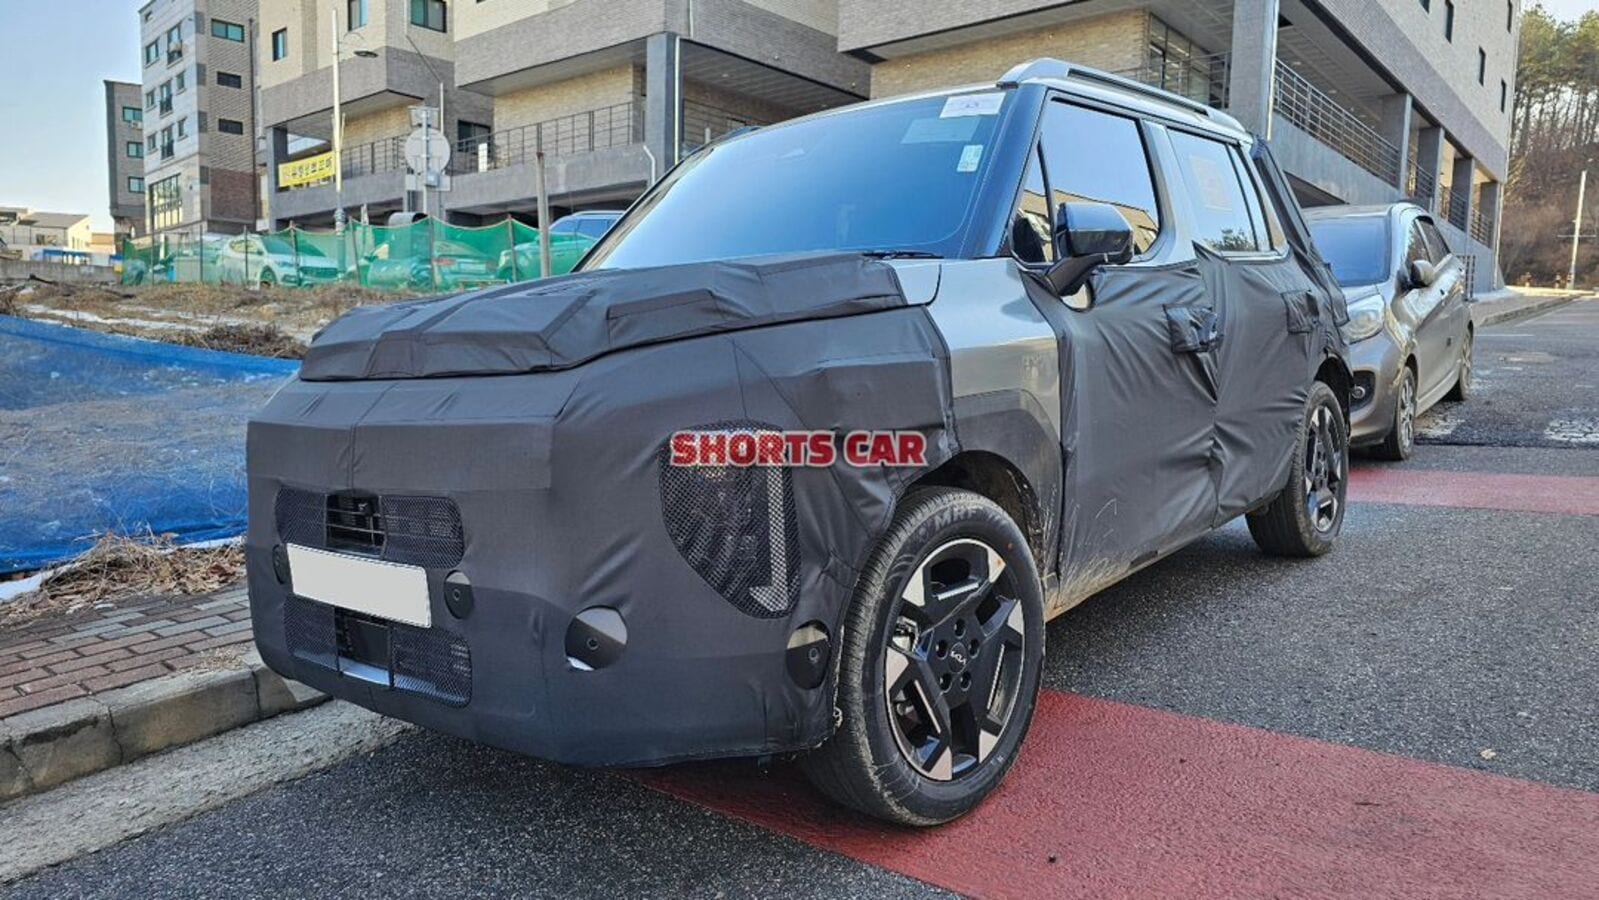 Check out latest spy shots of Kia Clavis. Is an India entry on the cards?